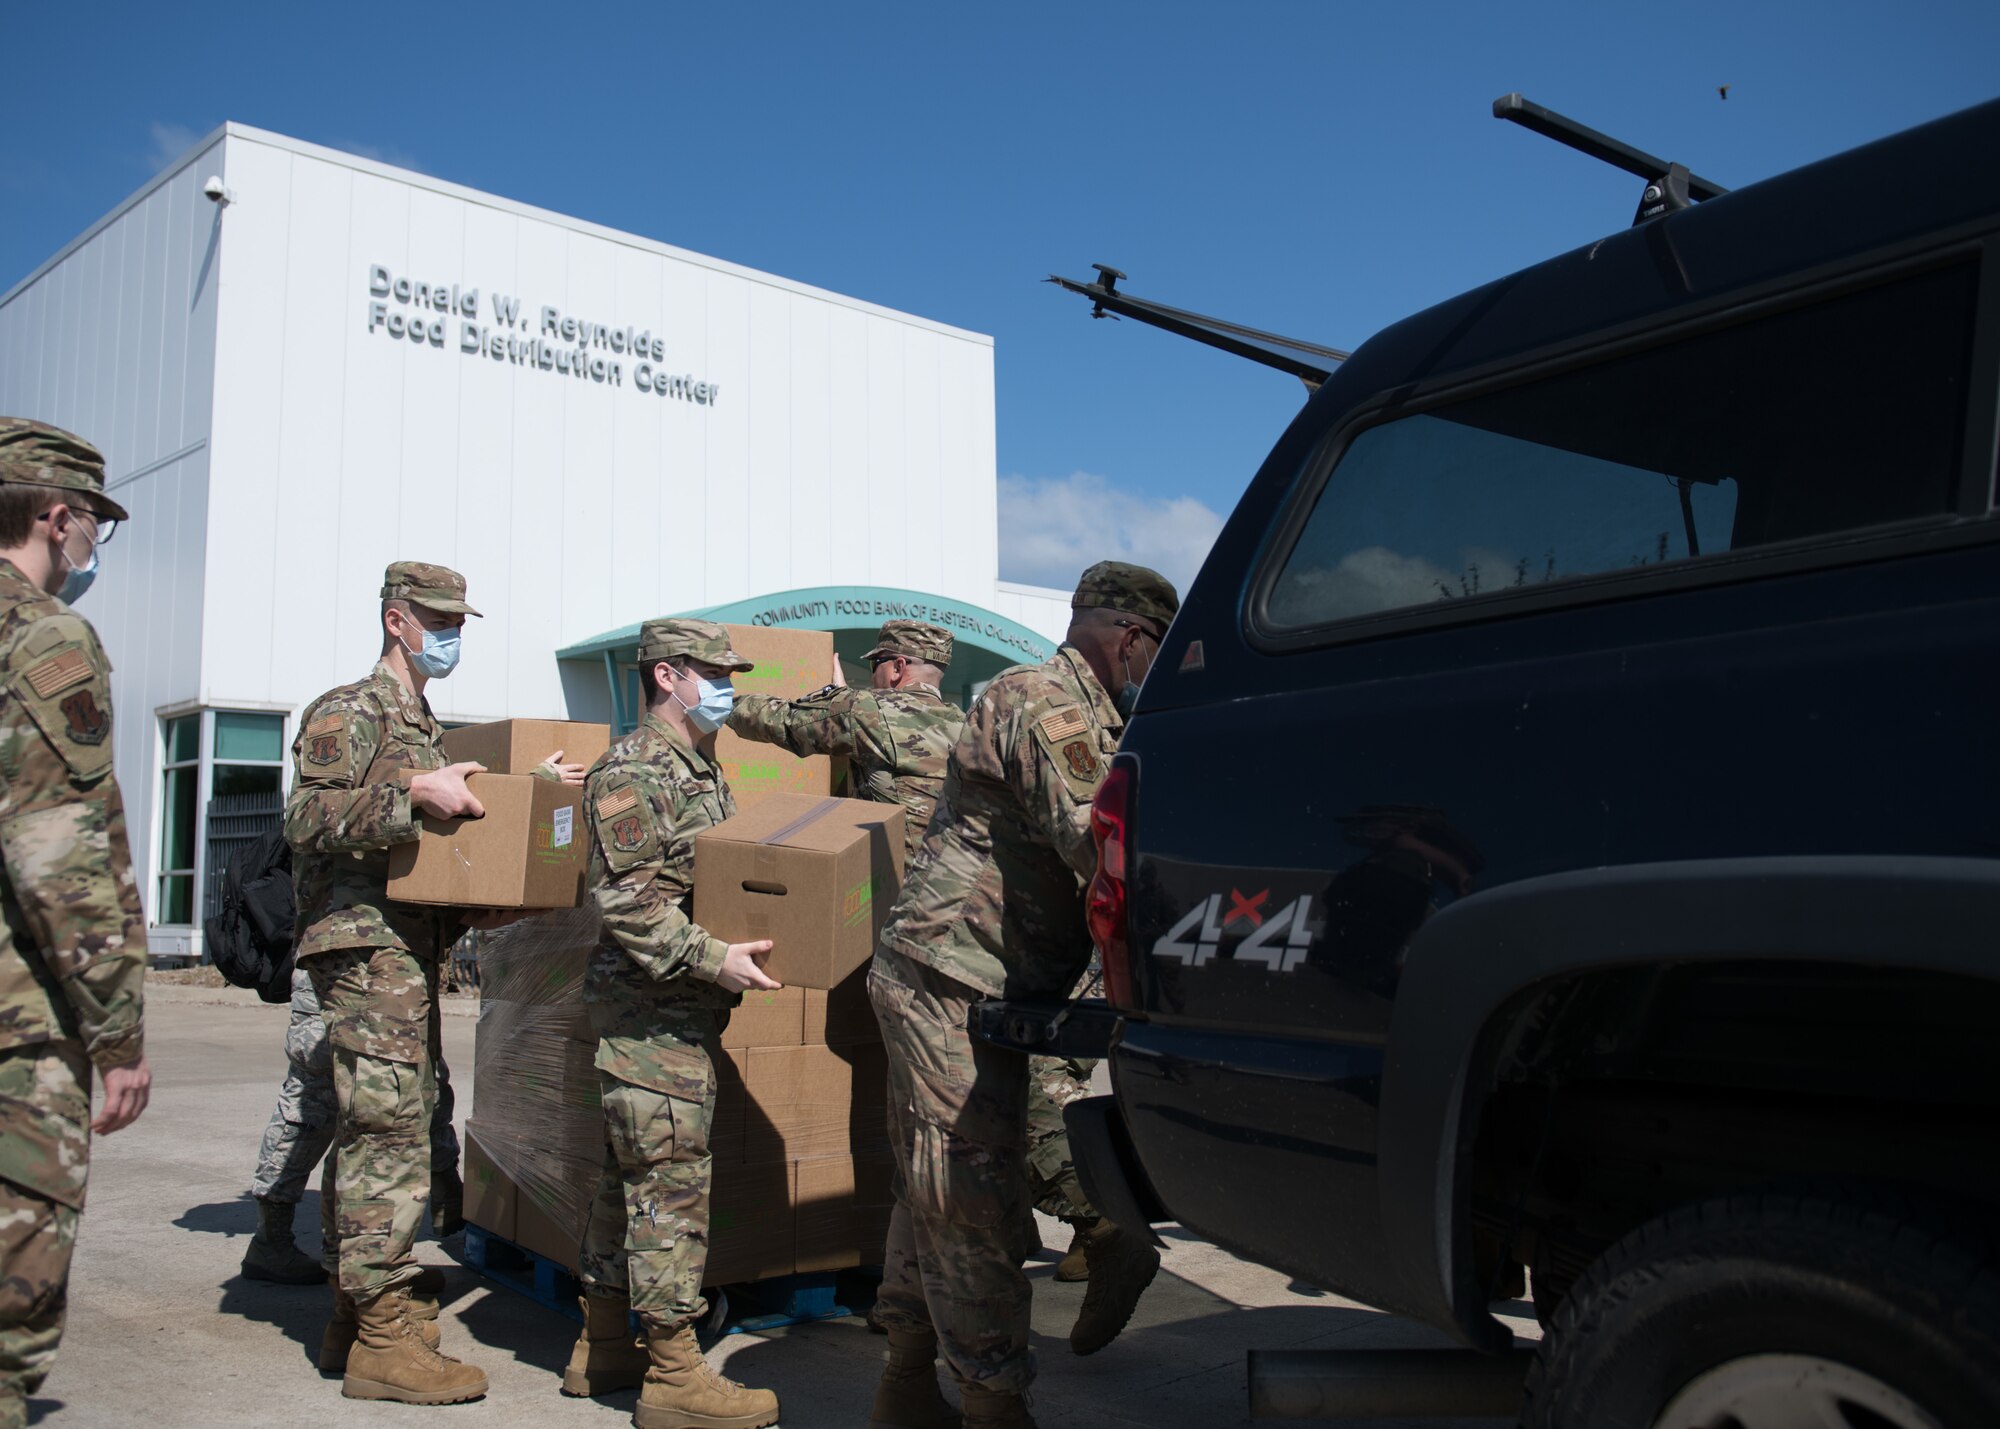 Airmen from the 138th Fighter Wing, Oklahoma Air National Guard, load boxes of food to be delivered at the Community Food Bank of Eastern Oklahoma in Tulsa, Oklahoma, April 23, 2020. Twenty five Airmen from the 138th FW are working with the food bank to provide support including receiving, packing and transporting food, as well as completing inventories of food bank supplies. At the direction and authorization of Oklahoma Governor Kevin Stitt, Oklahoma Guardsmen were activated to serve in various roles in support of the State's COVID-19 response (U.S. Air National Guard photo by Tech. Sgt. Rebecca Imwalle)